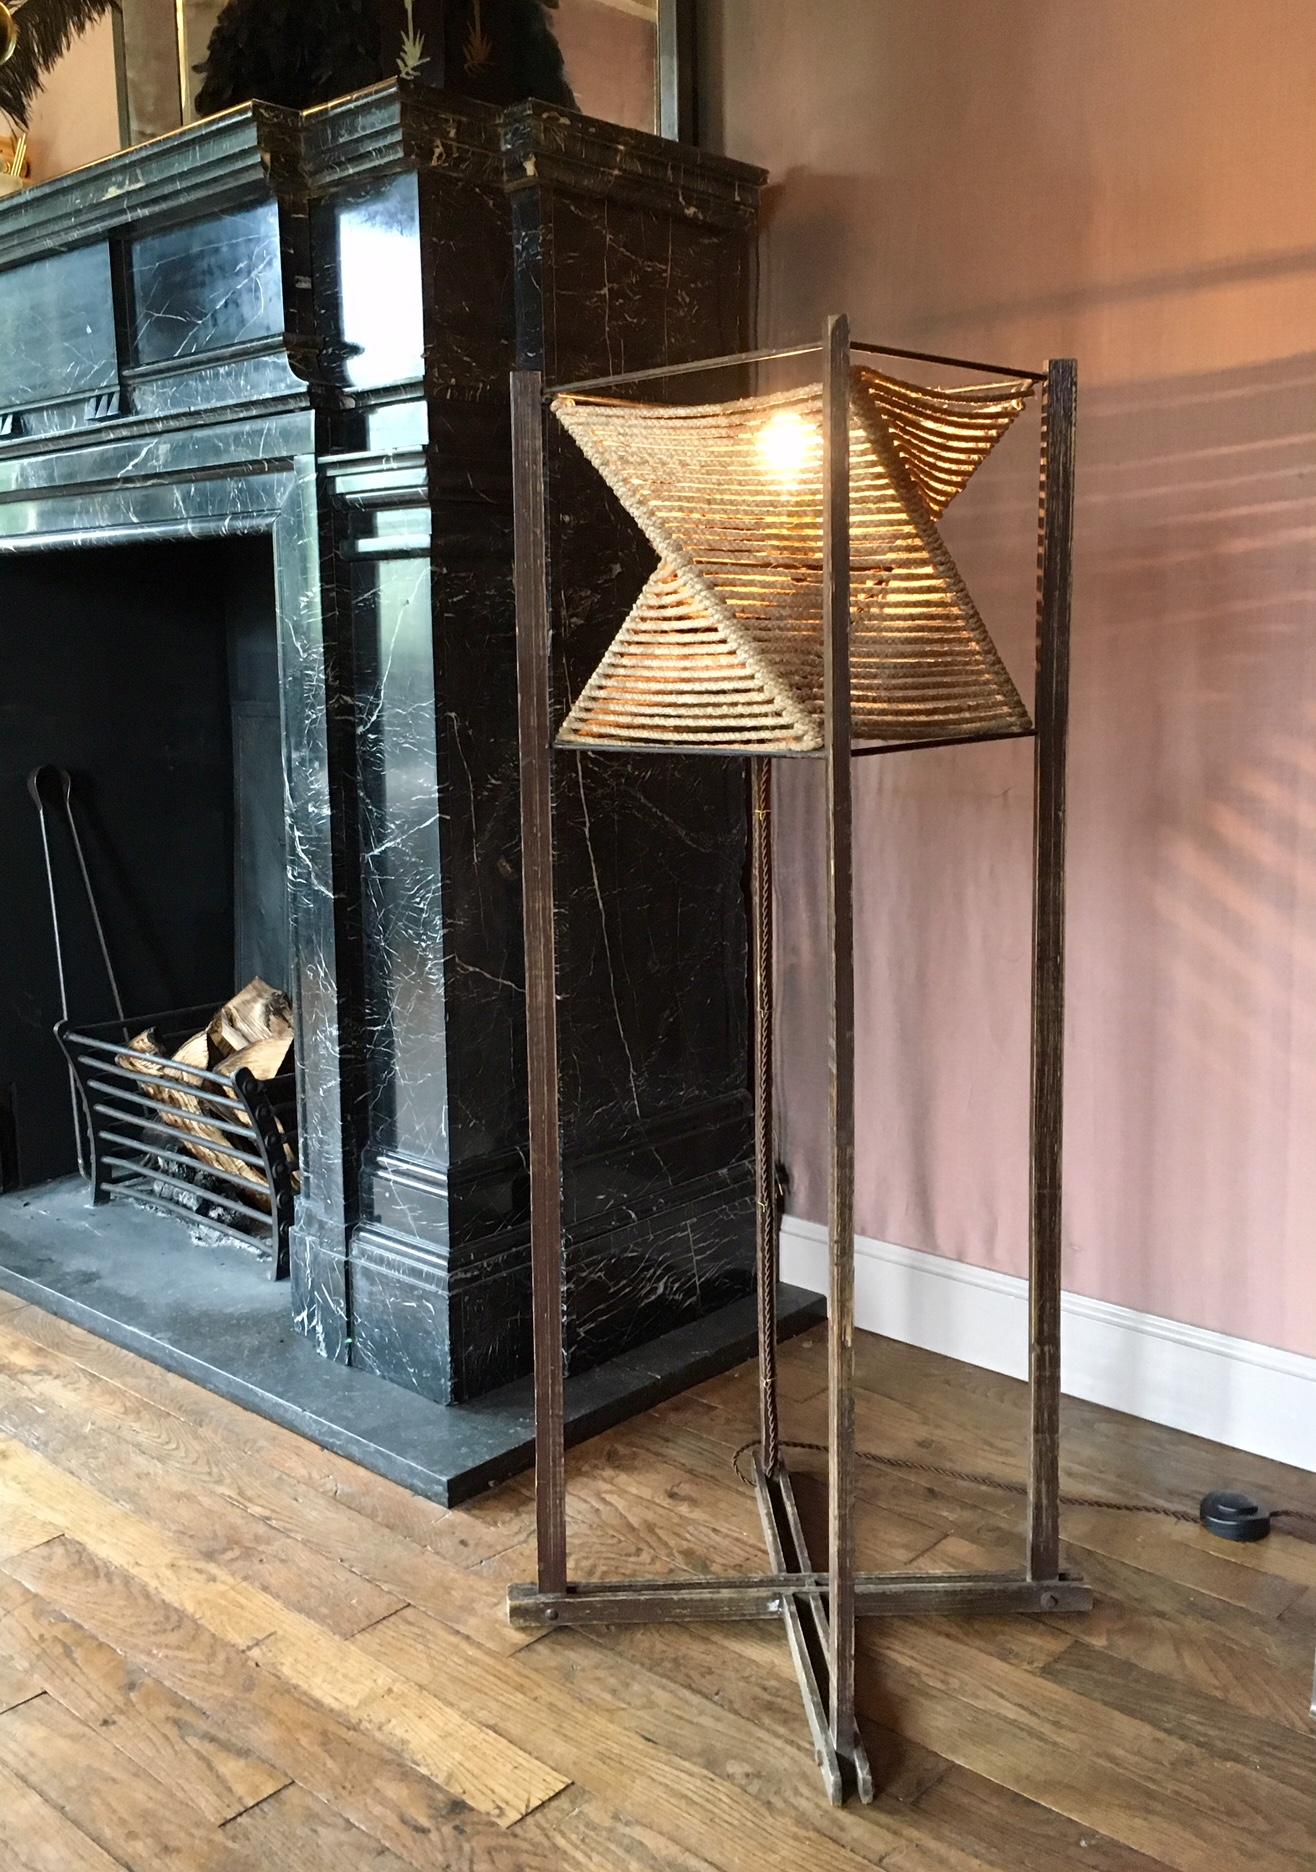 Mid-Century Modern style rope floor lamp, probably made in the 1970s. Made from wood and rope around an iron frame. Original electricity cord and switch. Measures: 110 cm in height and 33 cm in width and depth.